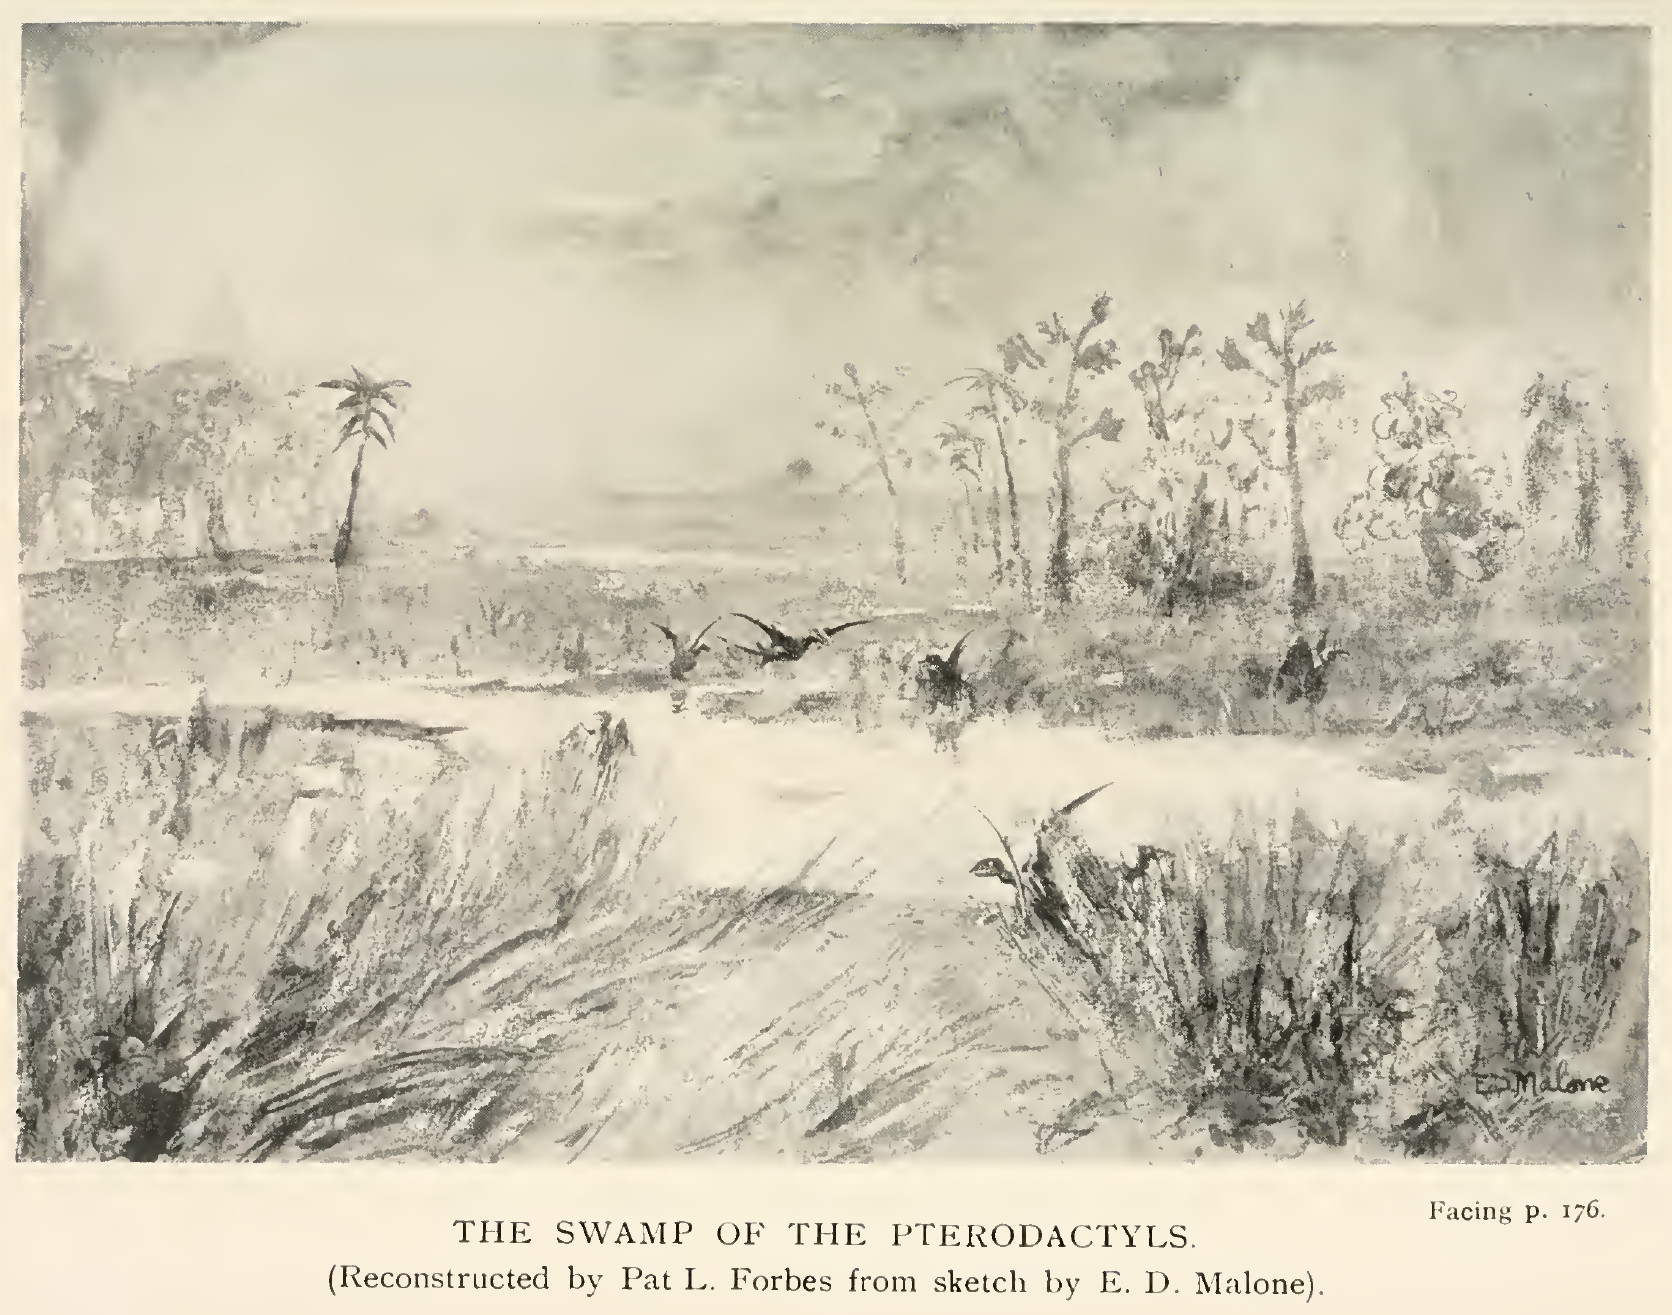 The swamp of the Pterodactyls.